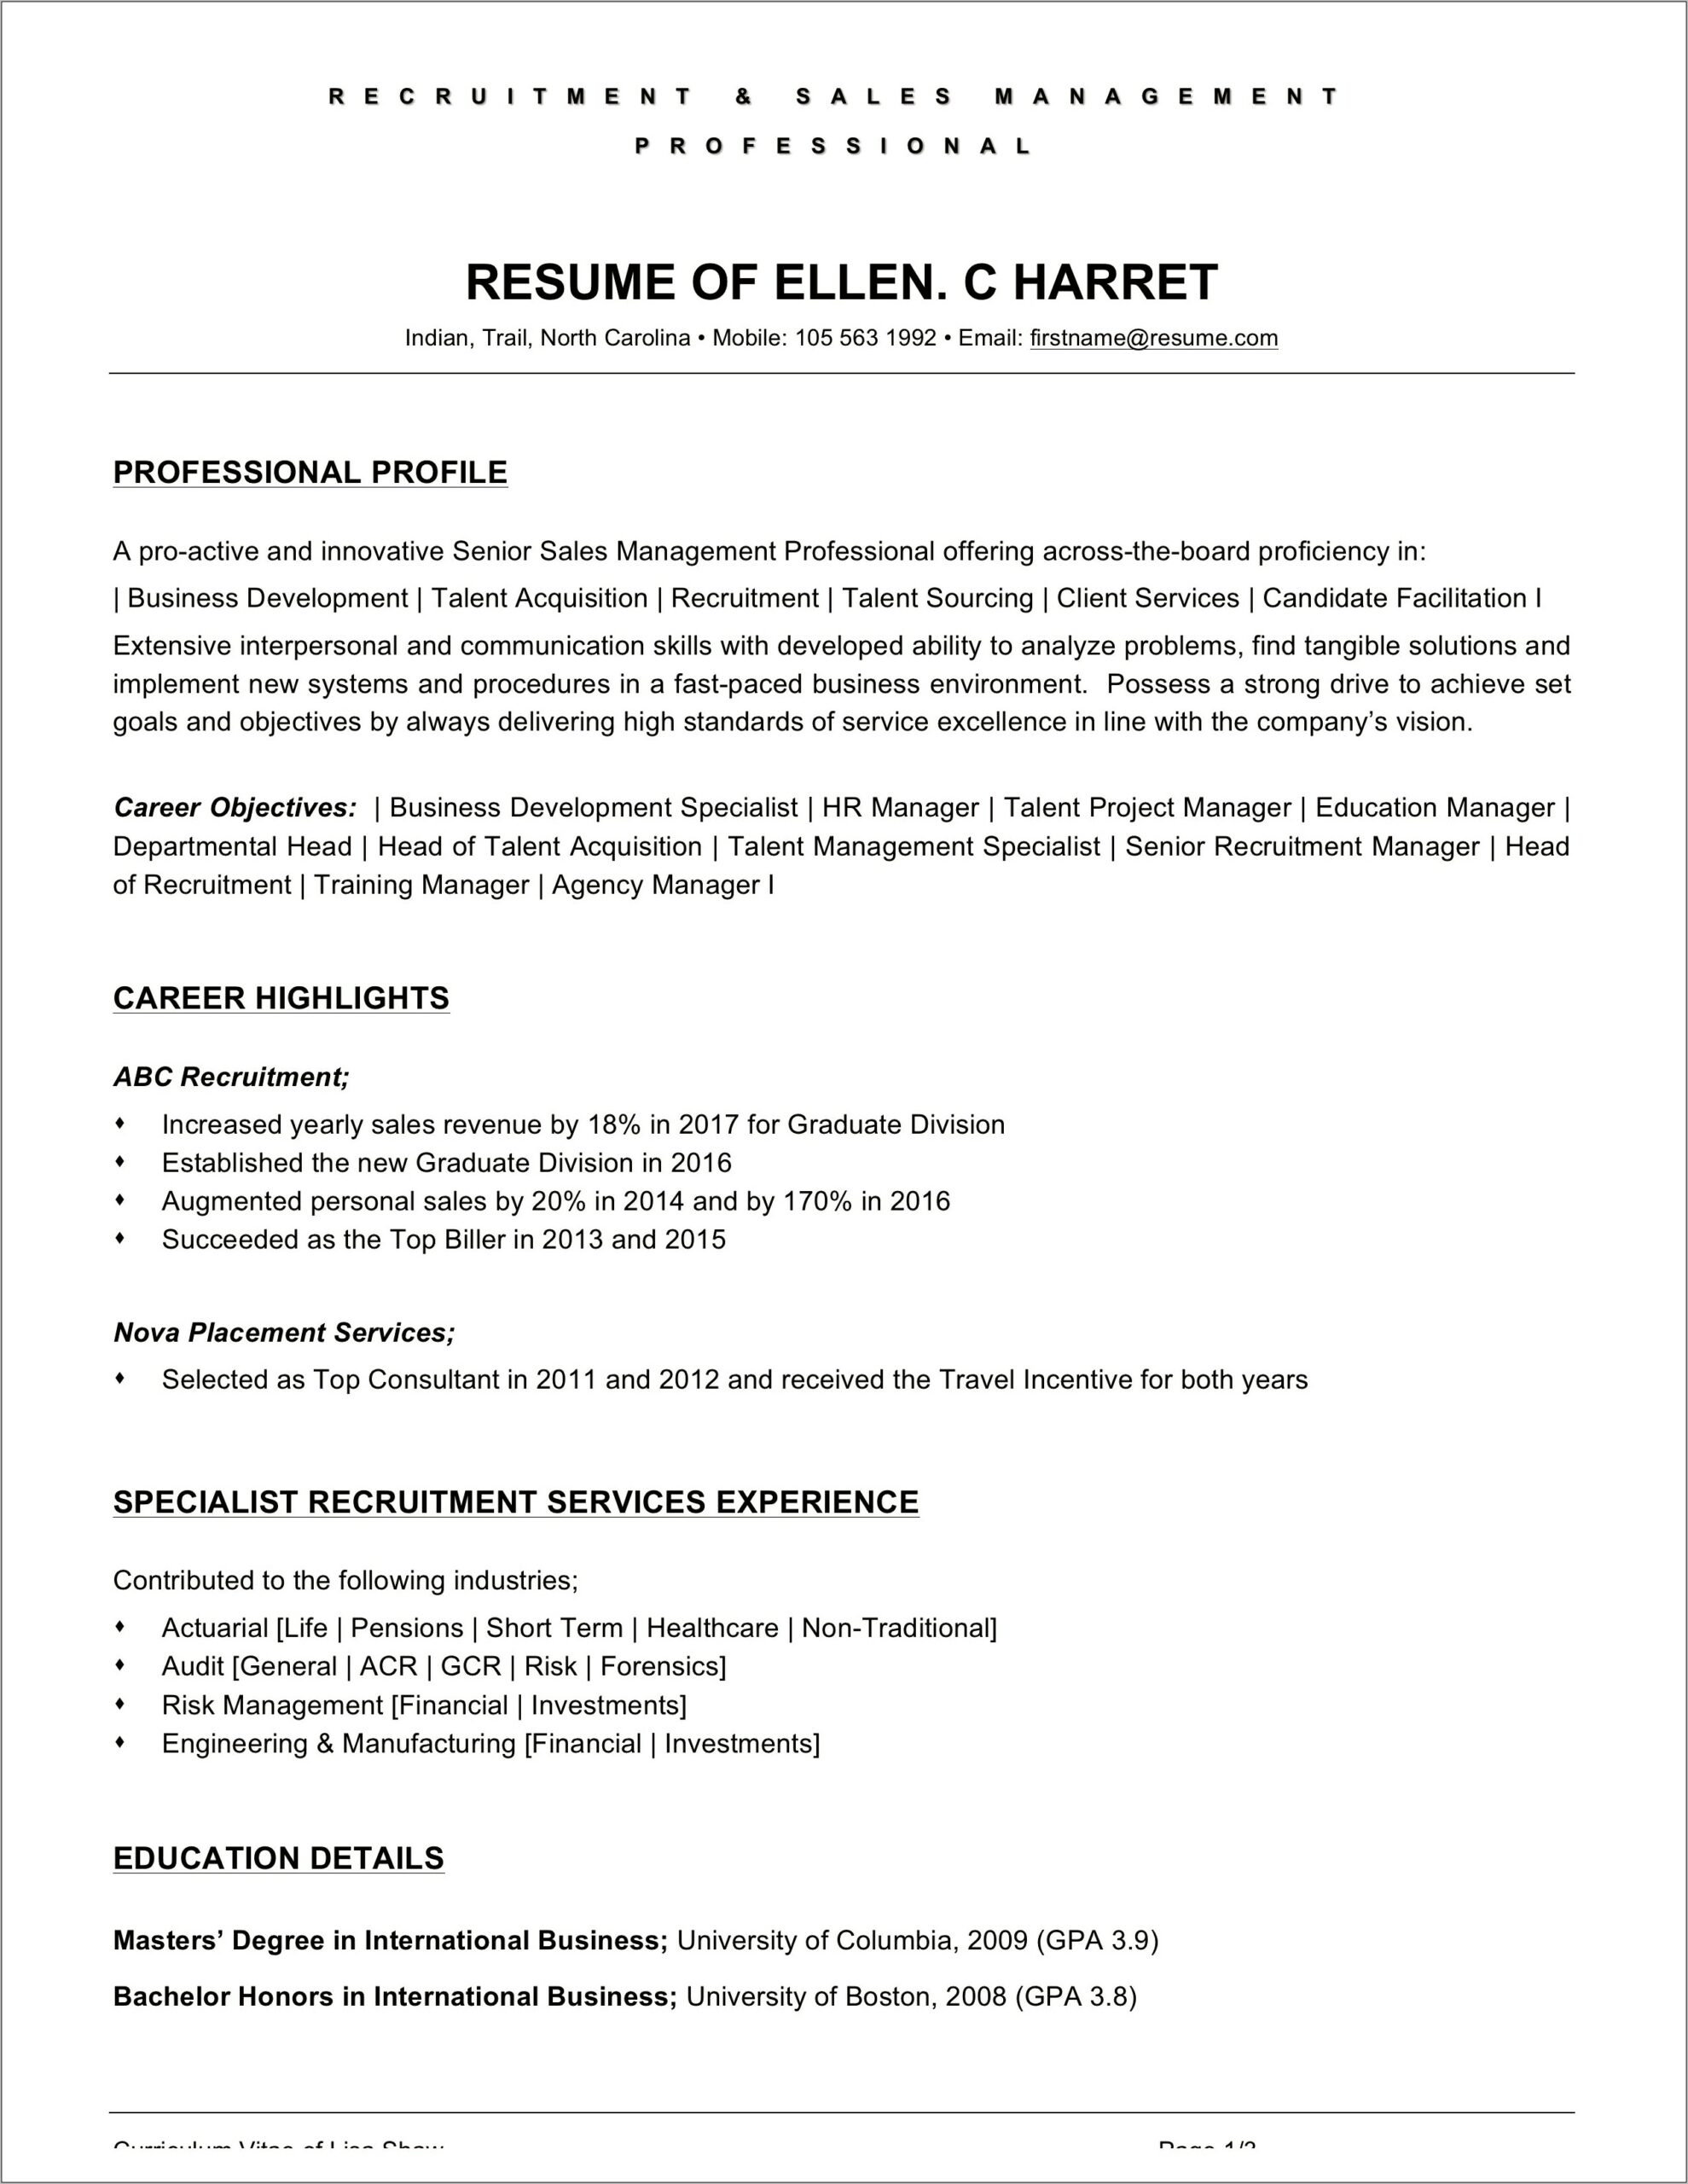 Resume Objectives For Fresh Graduate Business Administration